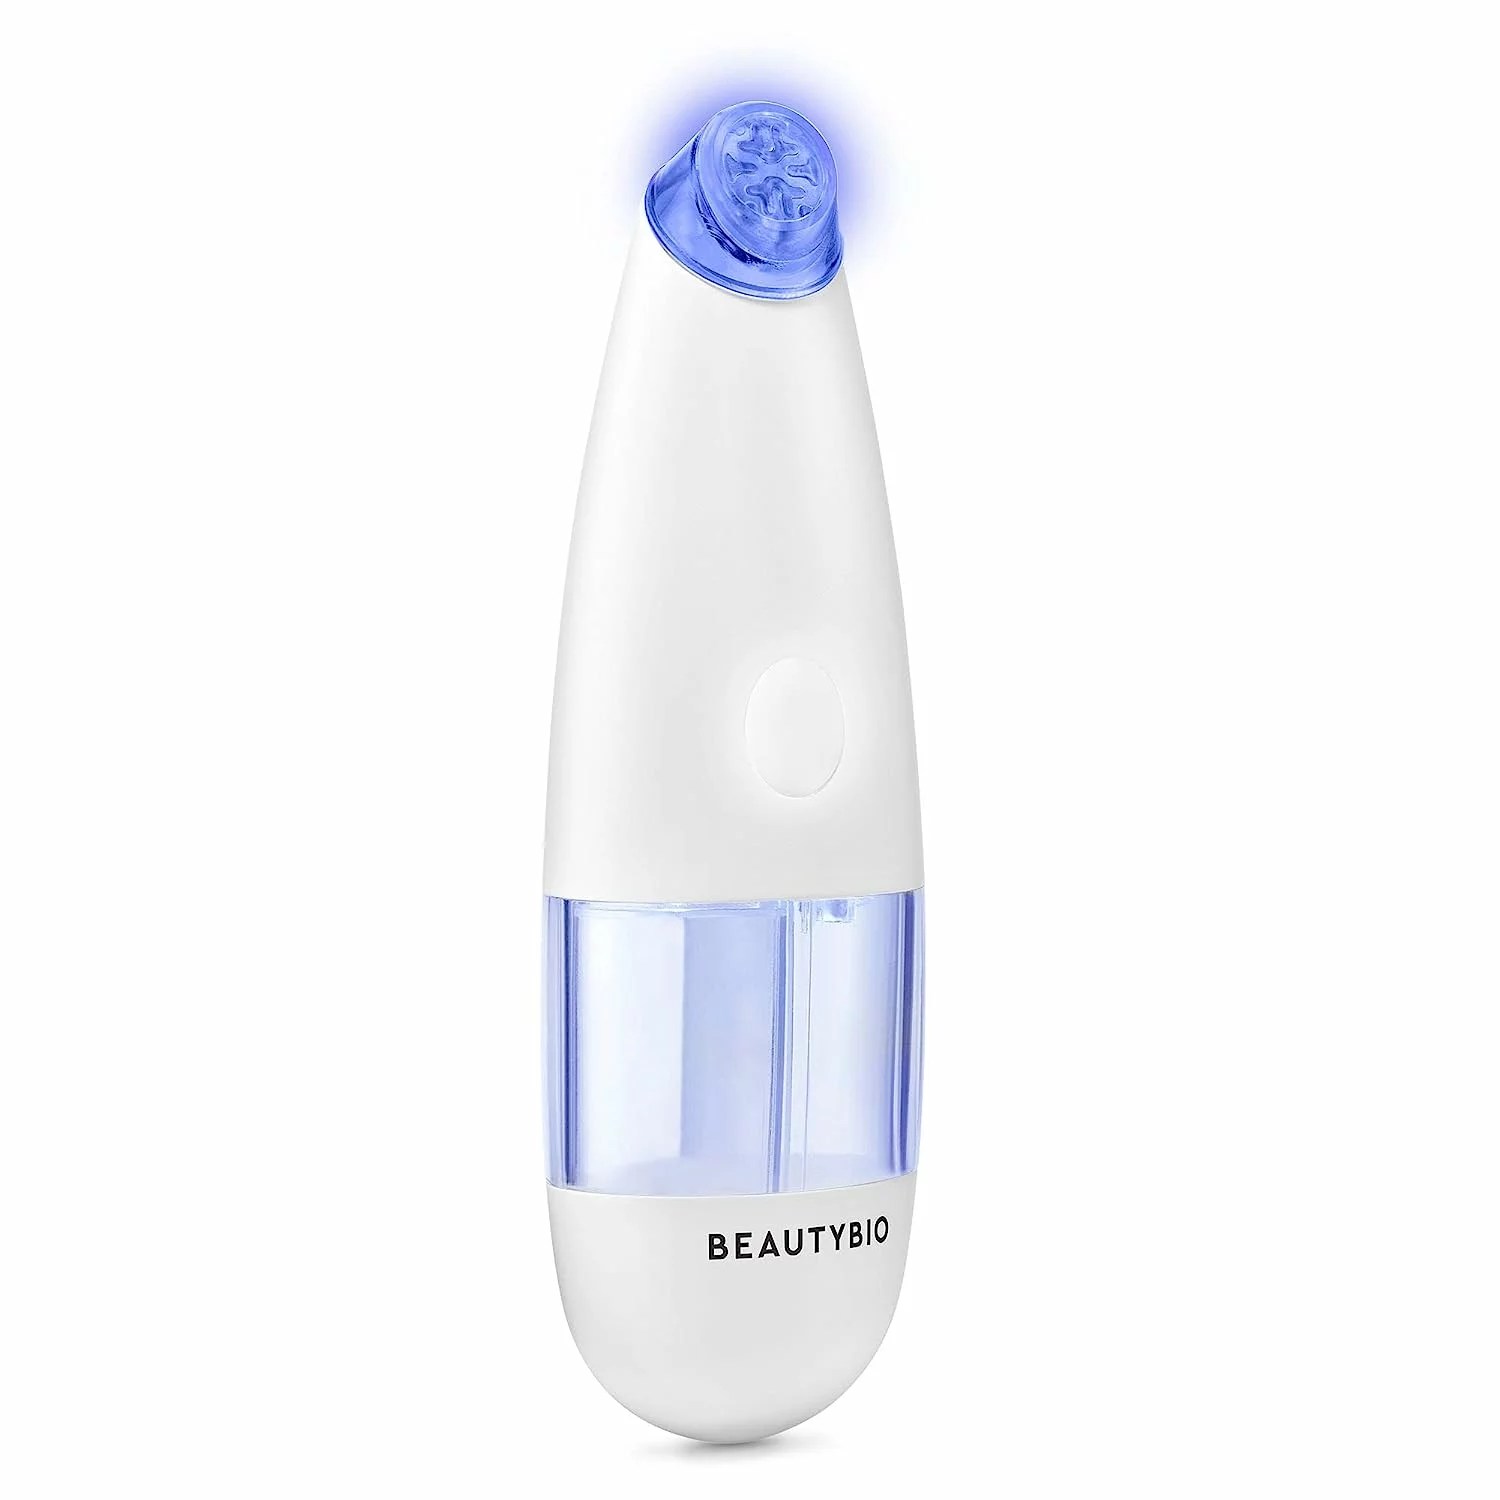 a beautybio glofacial cleansing tool, on sale during prime big deal days